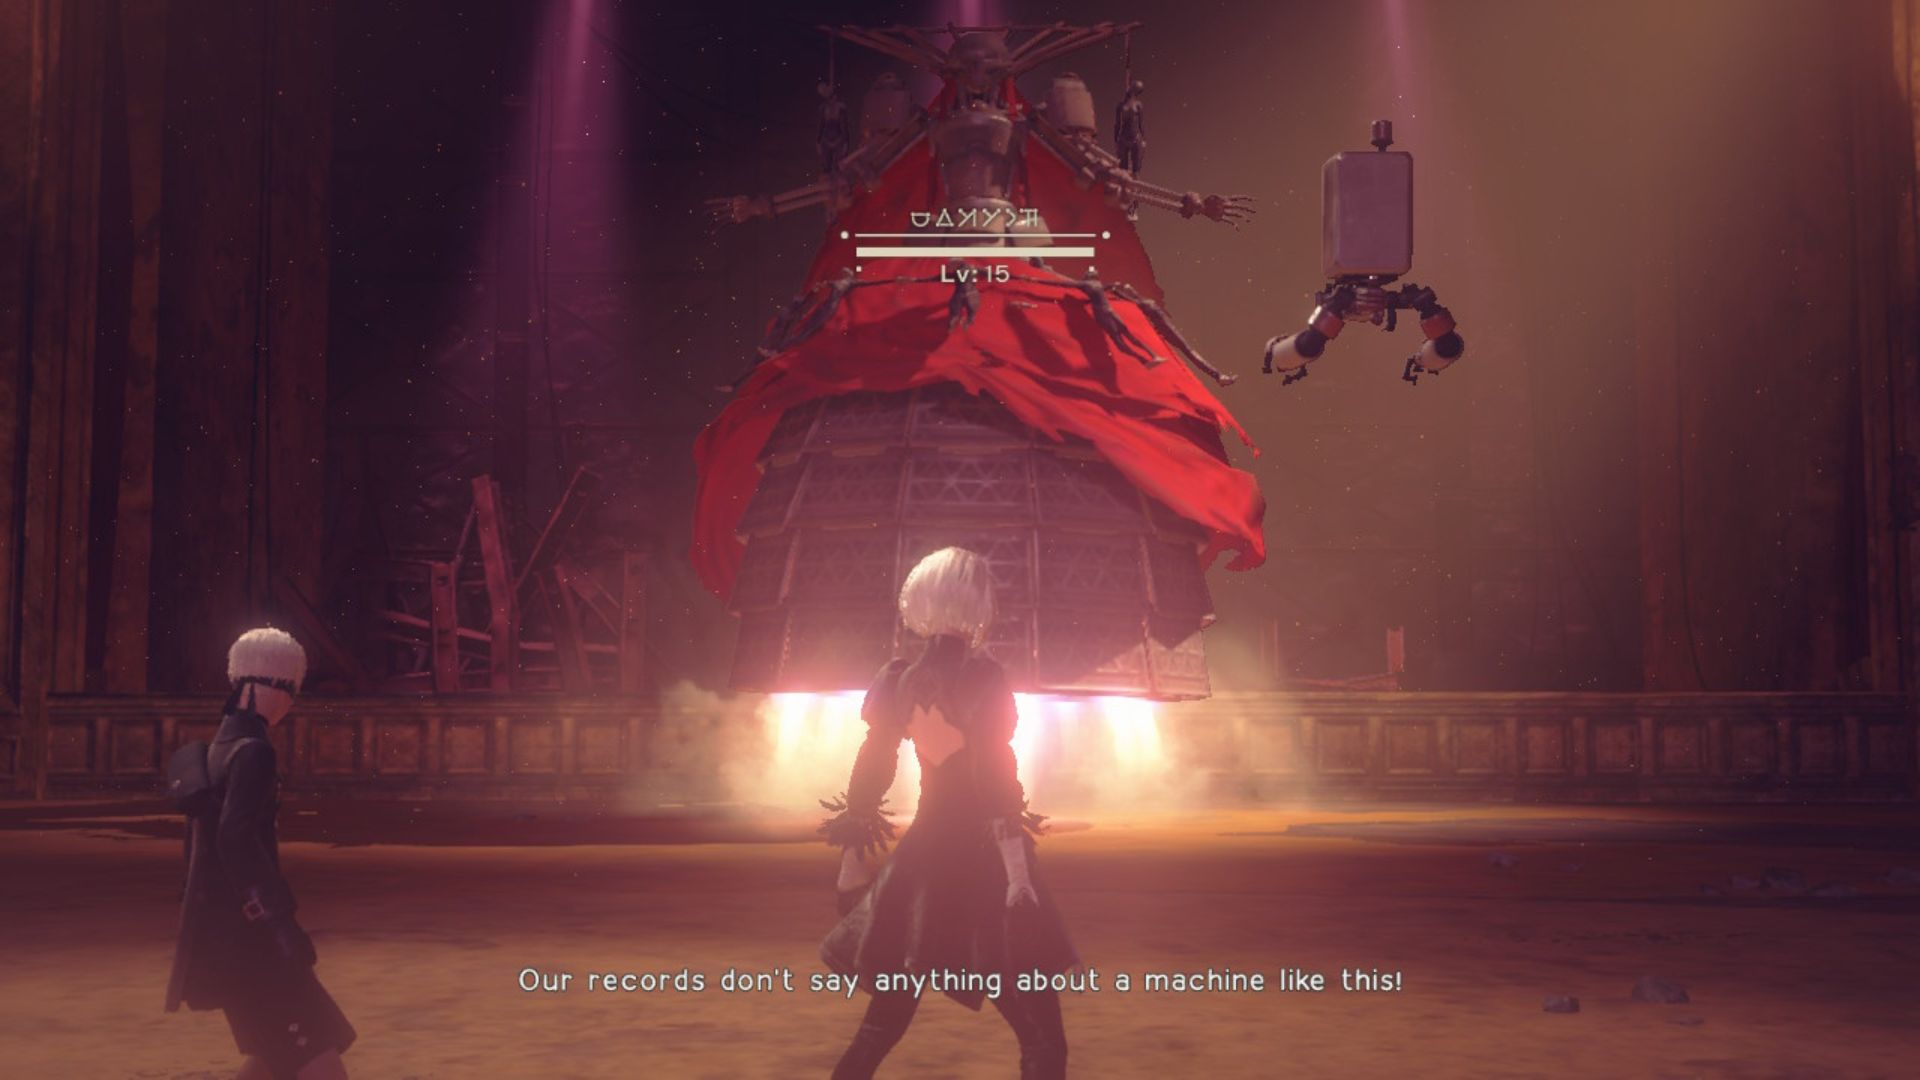 Nier Automata on Switch Shows The Glory of Portkind - GamerBraves